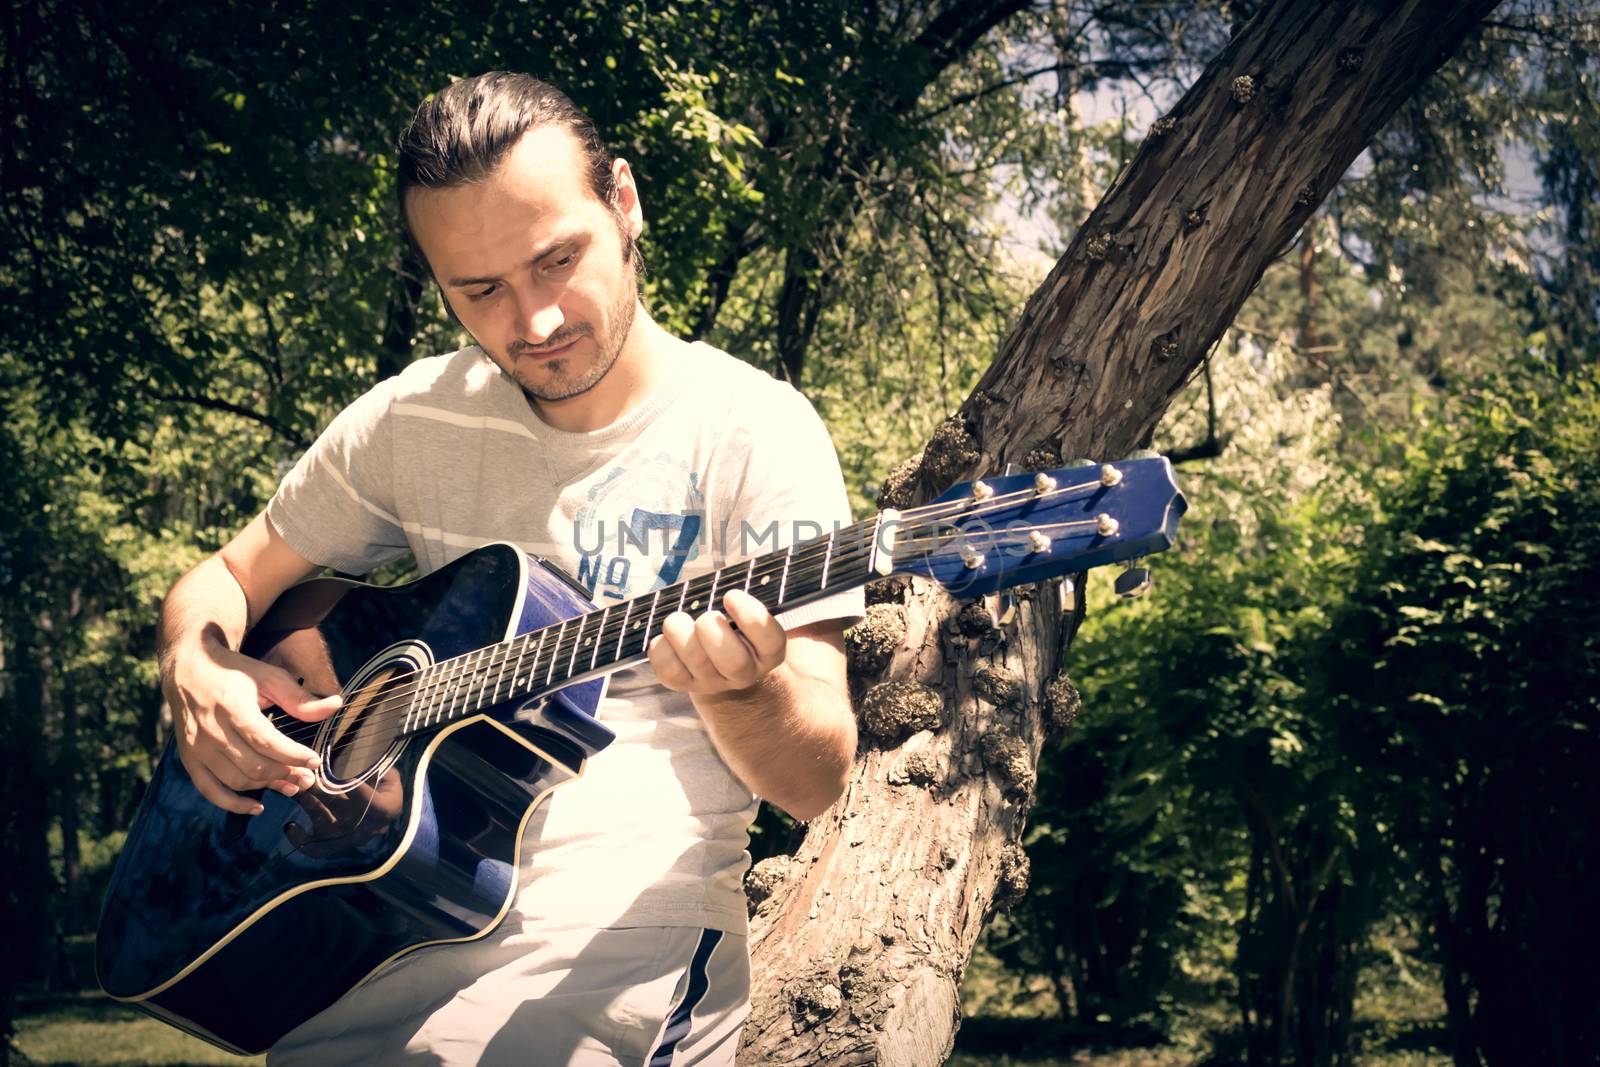 Guitar player singing in a park sitting on a tree